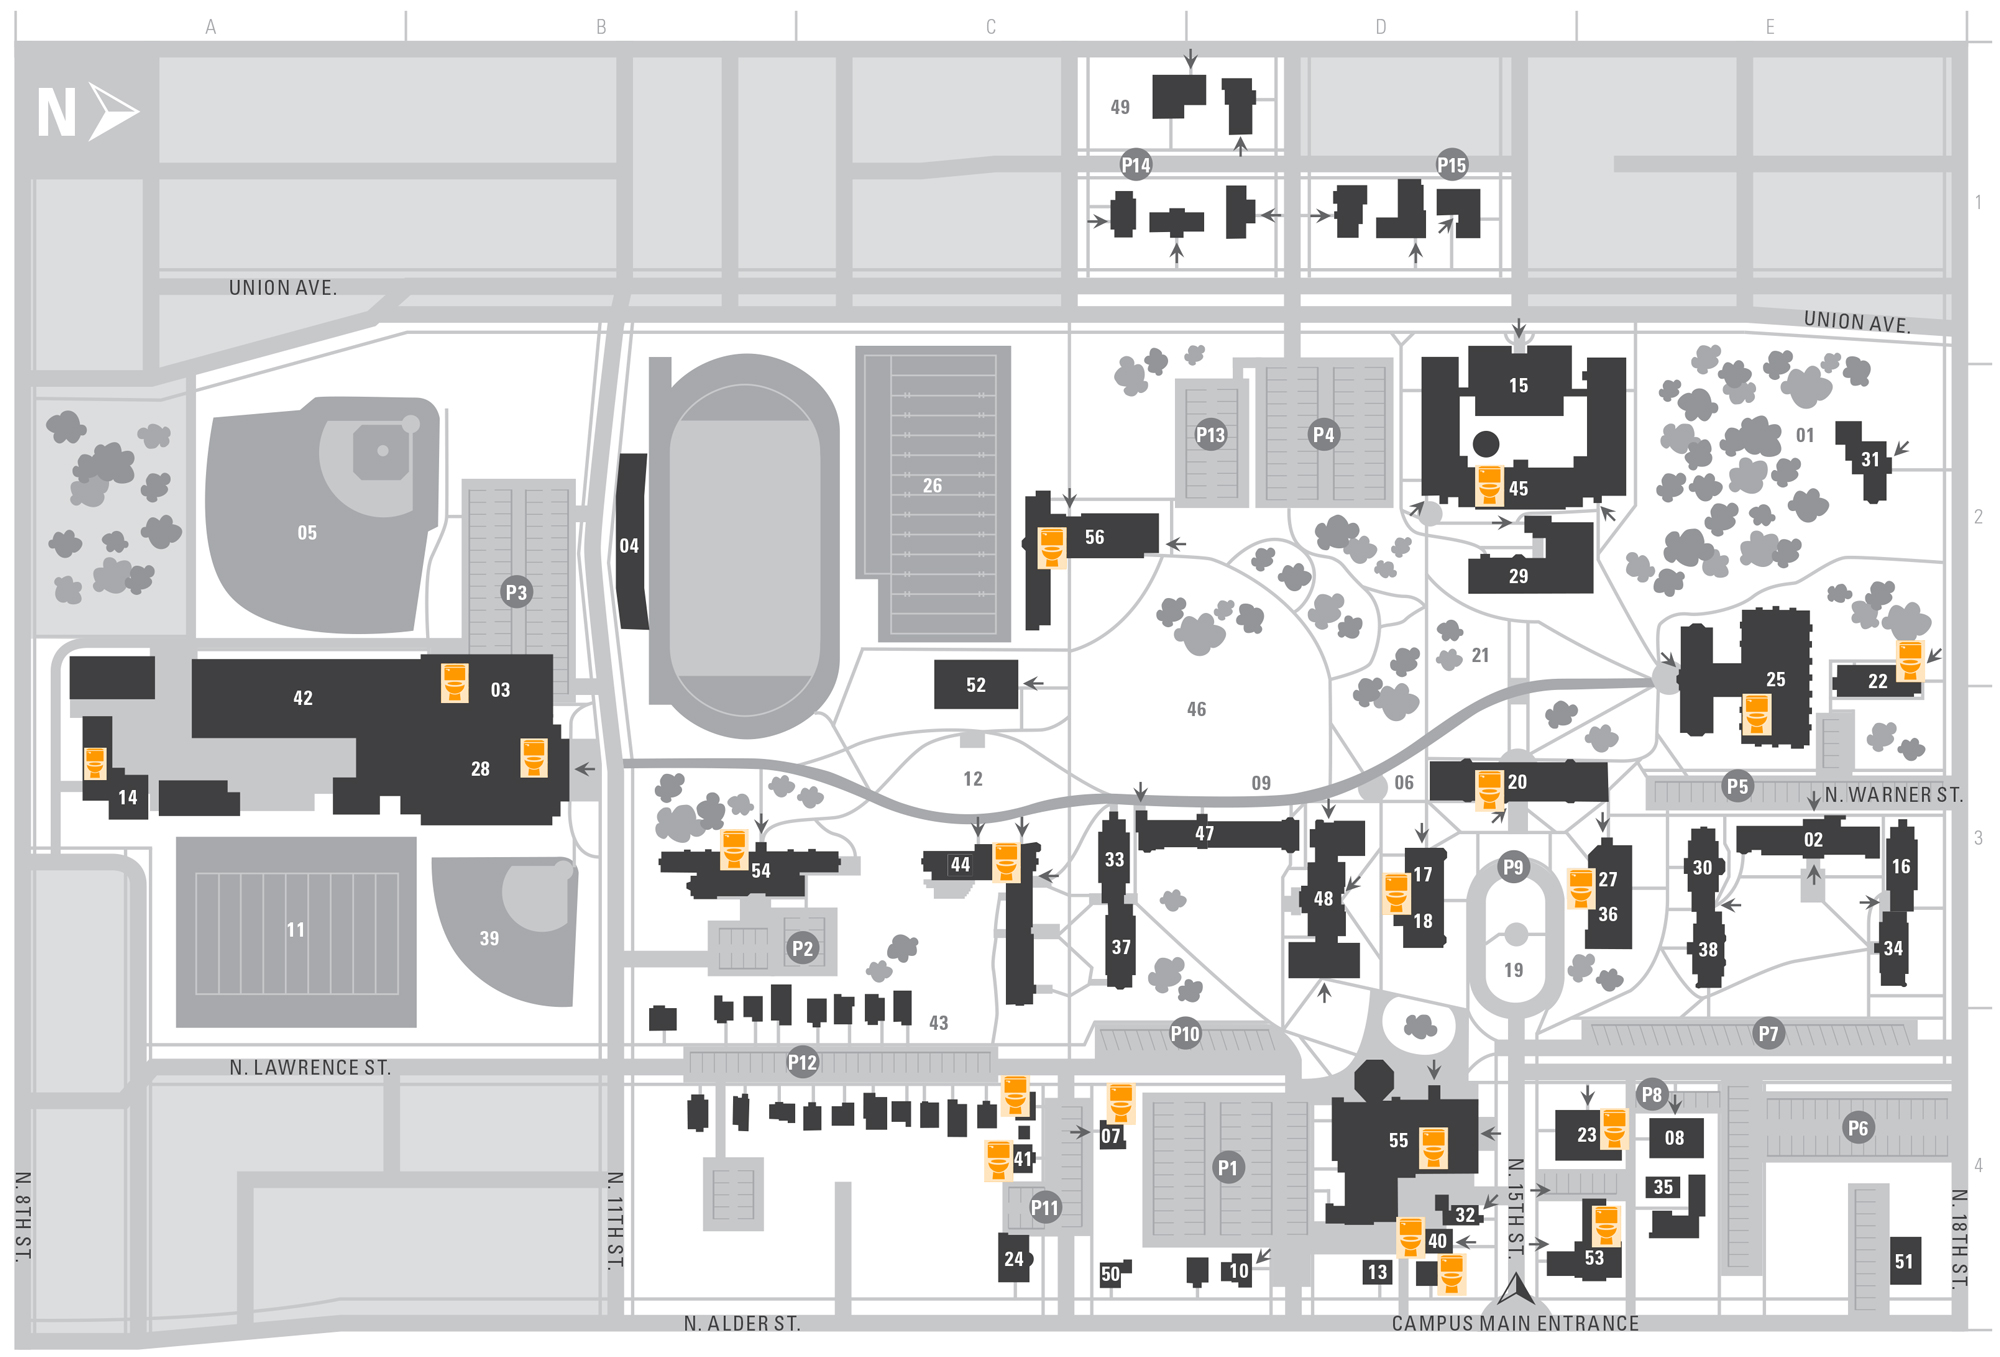 Campus map showing locations of all gender restrooms